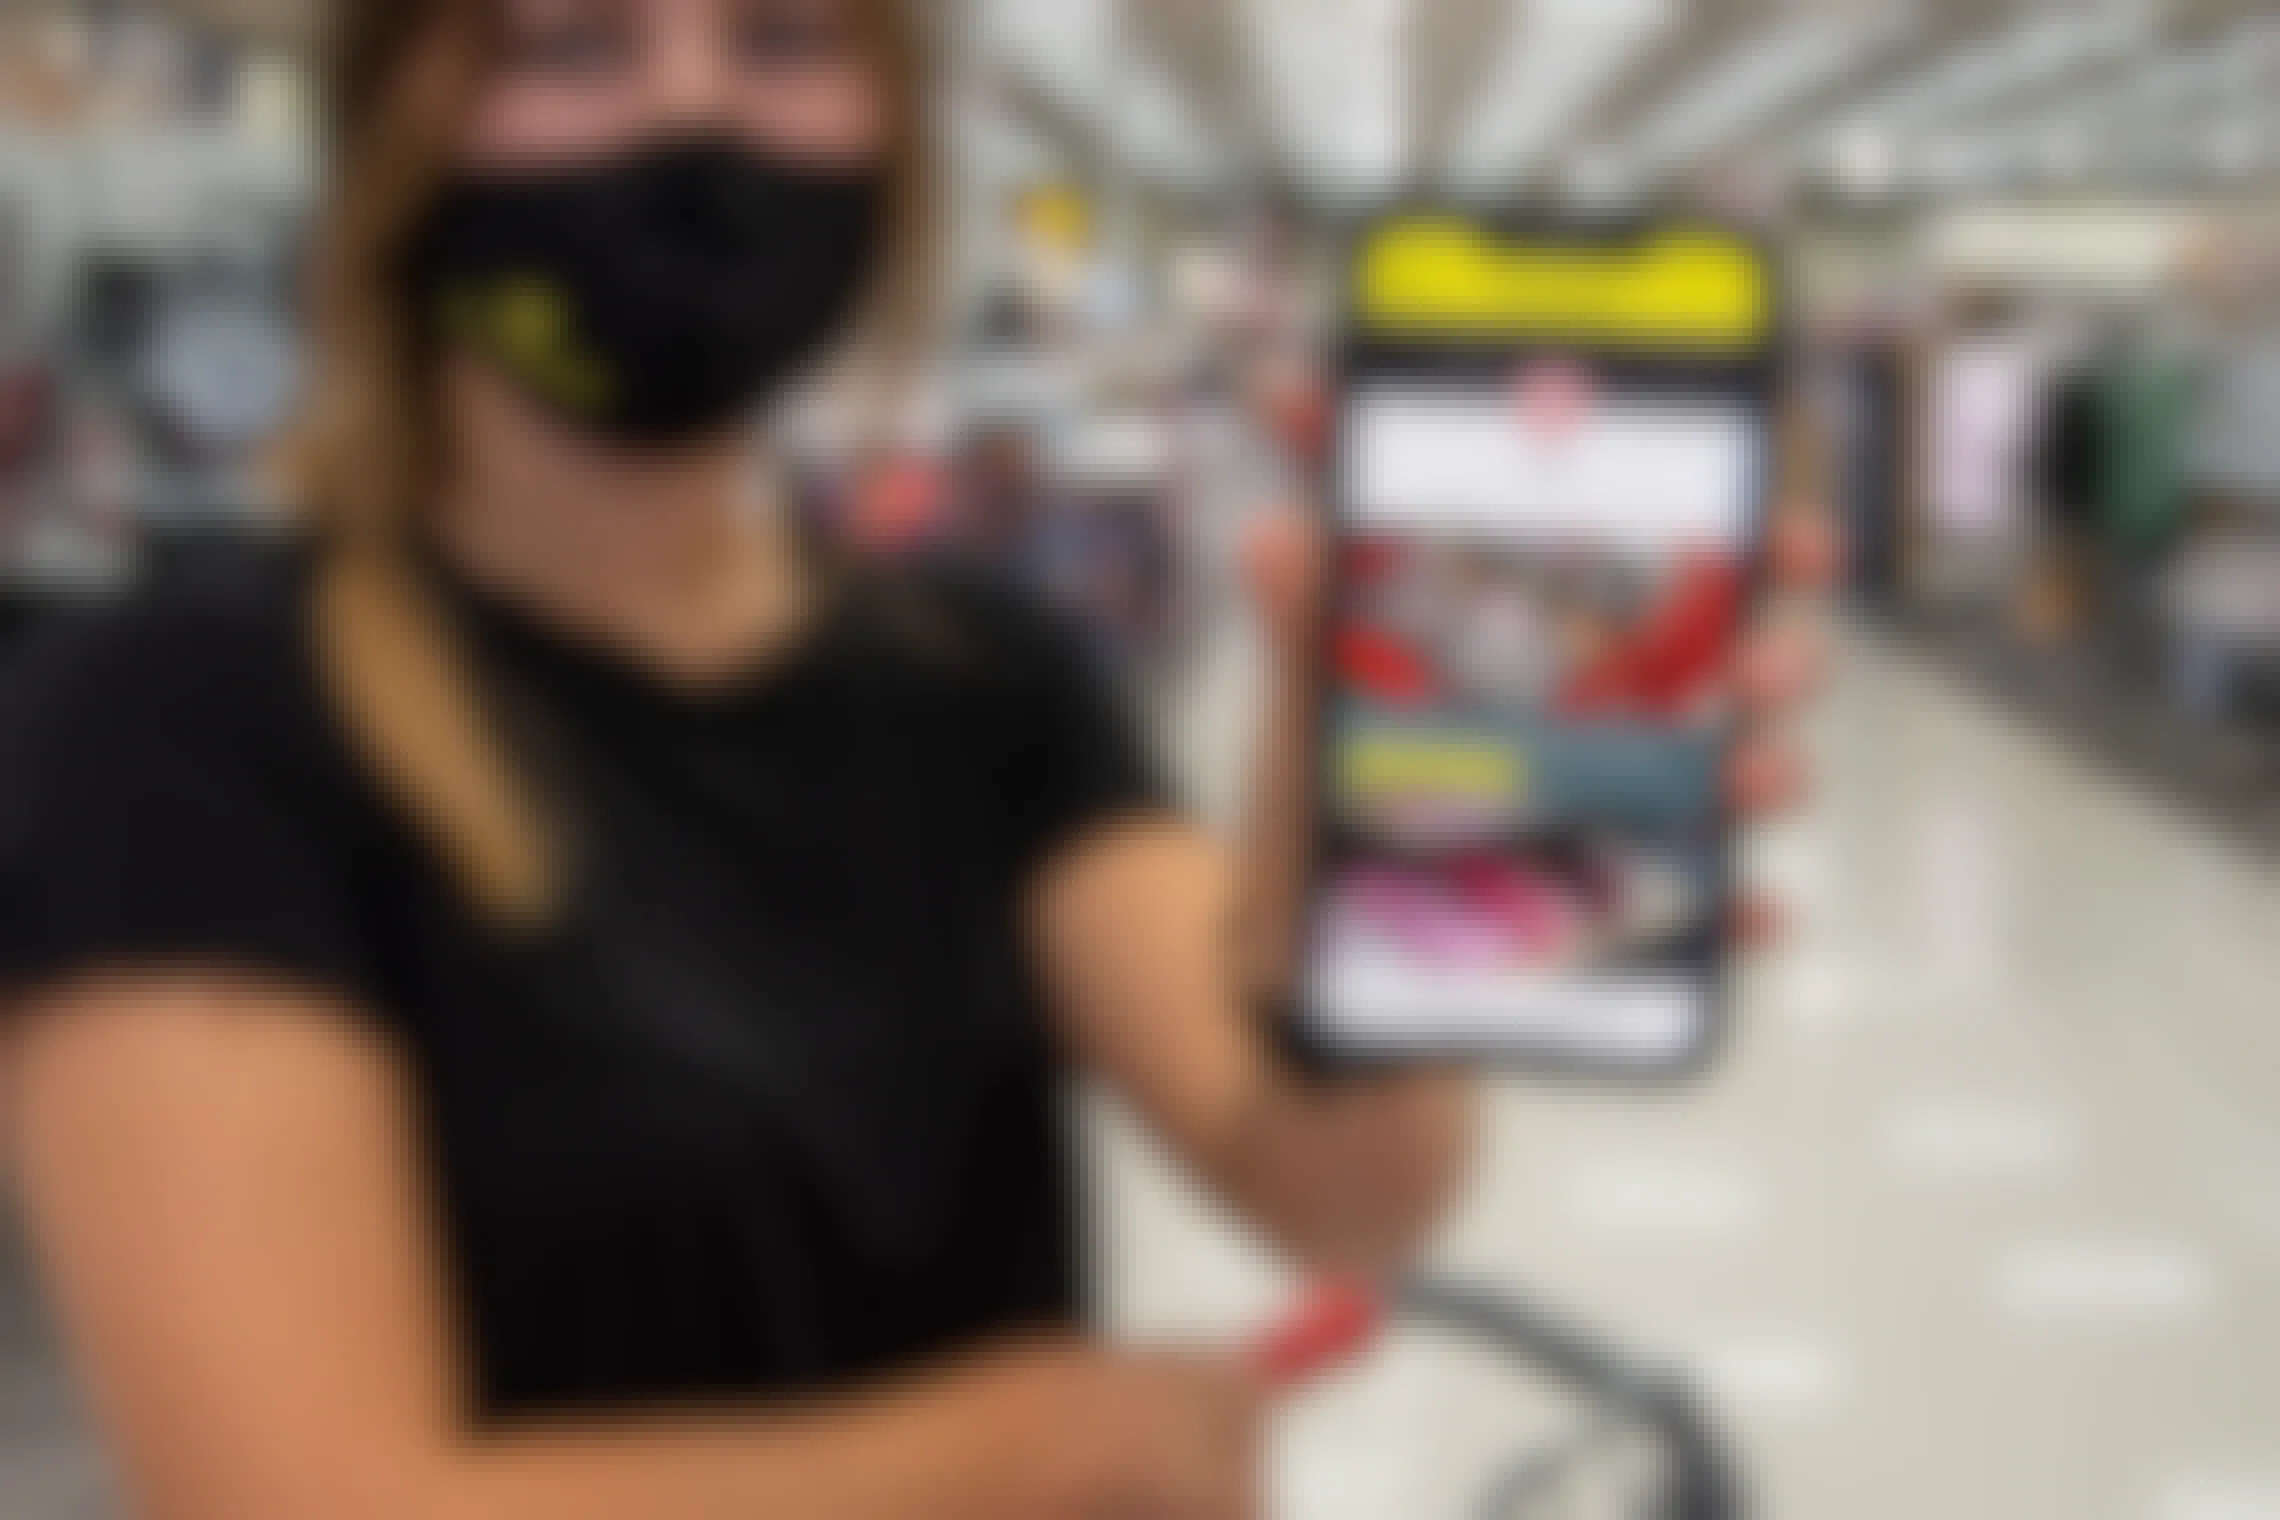 A woman wearing a mask, holding up a phone displaying the KCL app's Target page.